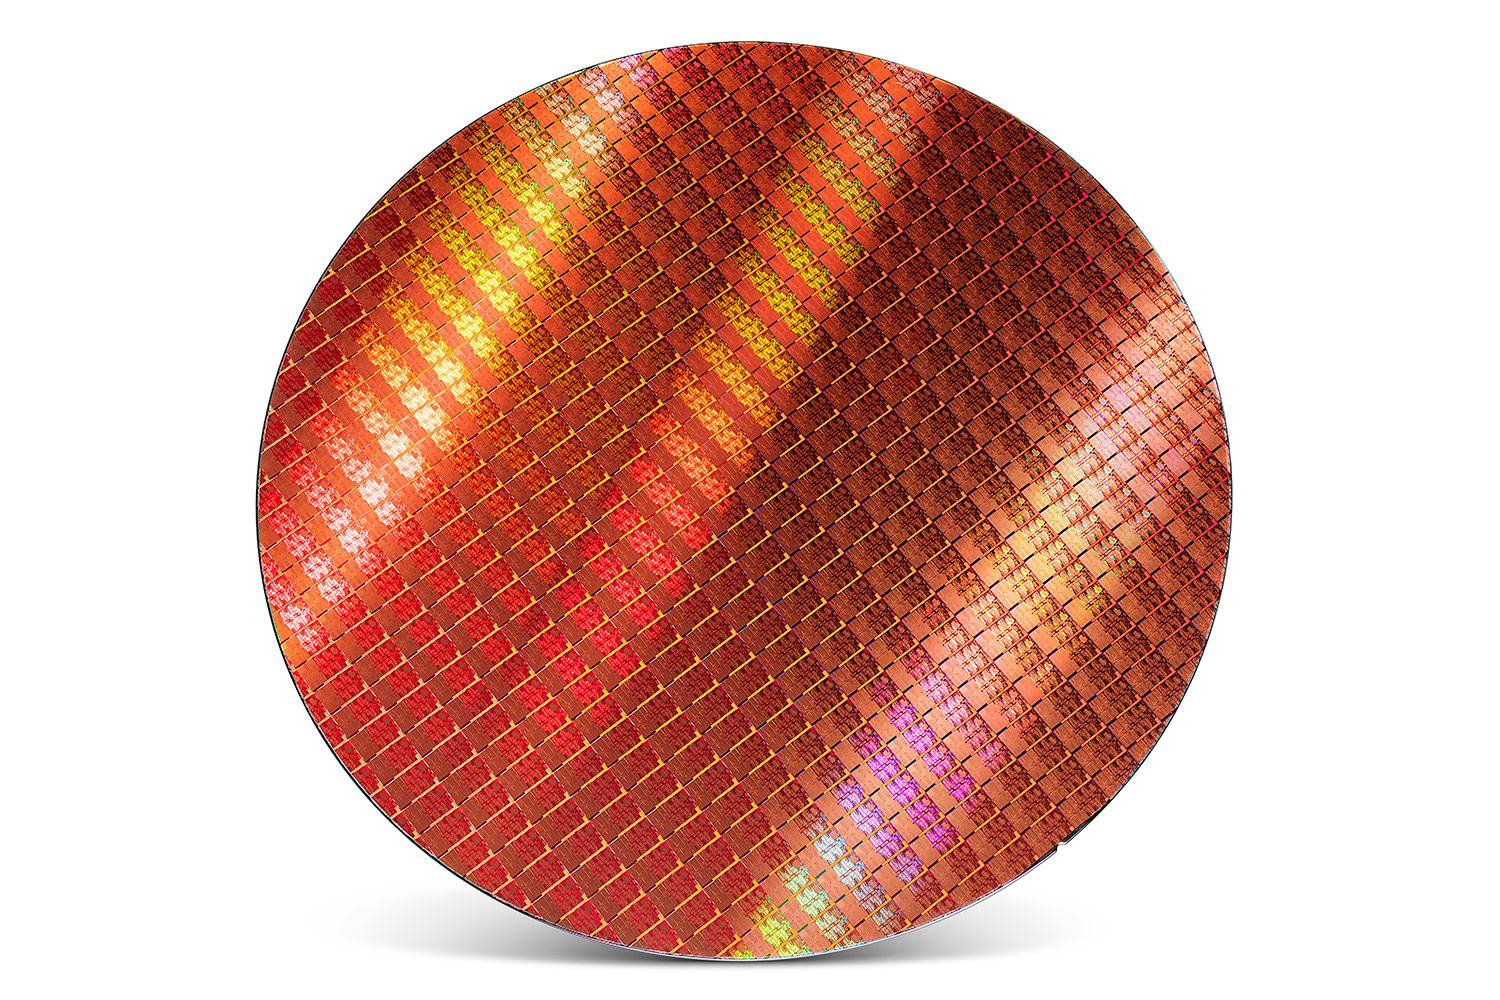 7th generation intel core ces 2017 frontal wafer a 04 8000pixels